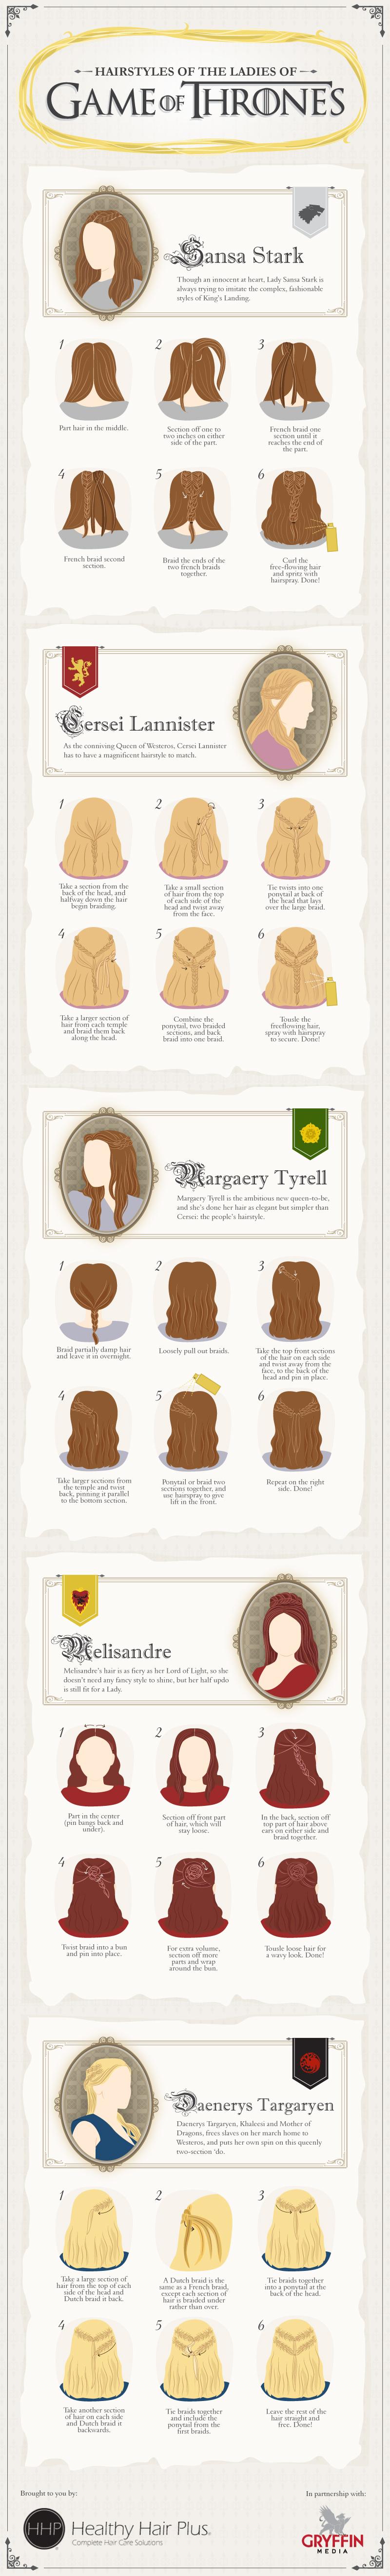 HAIR STYLE OF THE LADIES OF GAME OF THRONES